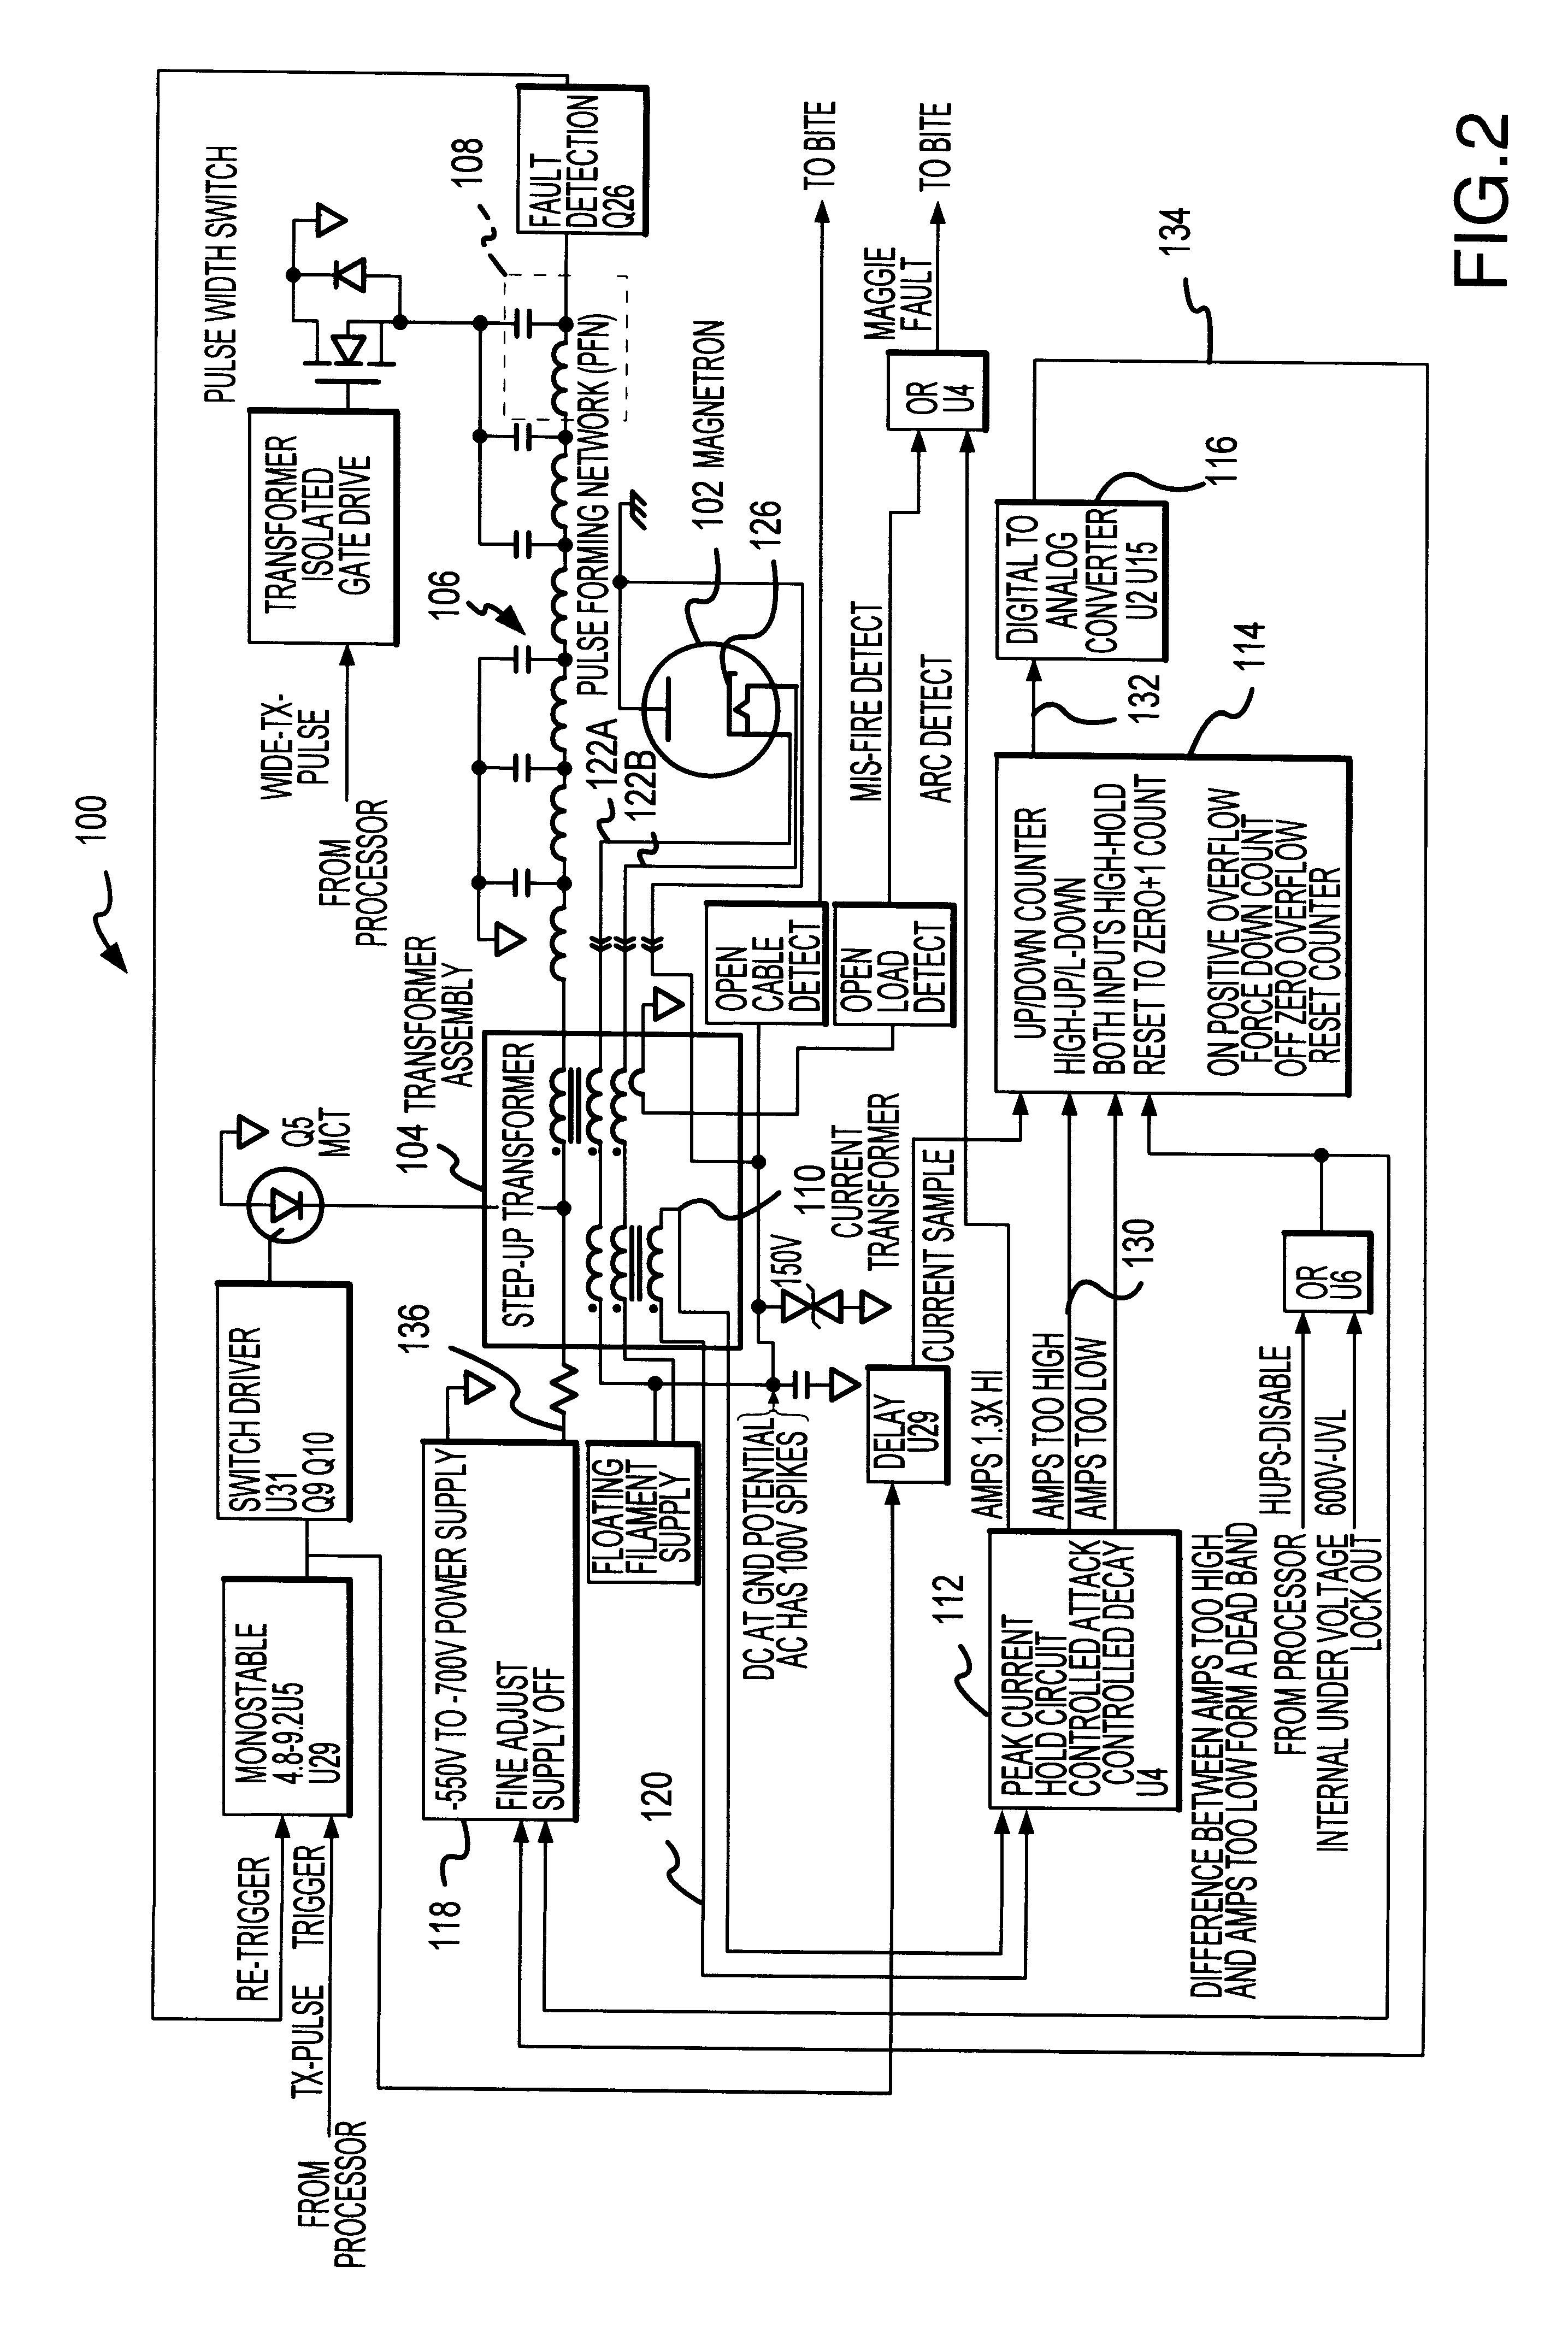 Methods and apparatus for the closed loop control of magnetron current